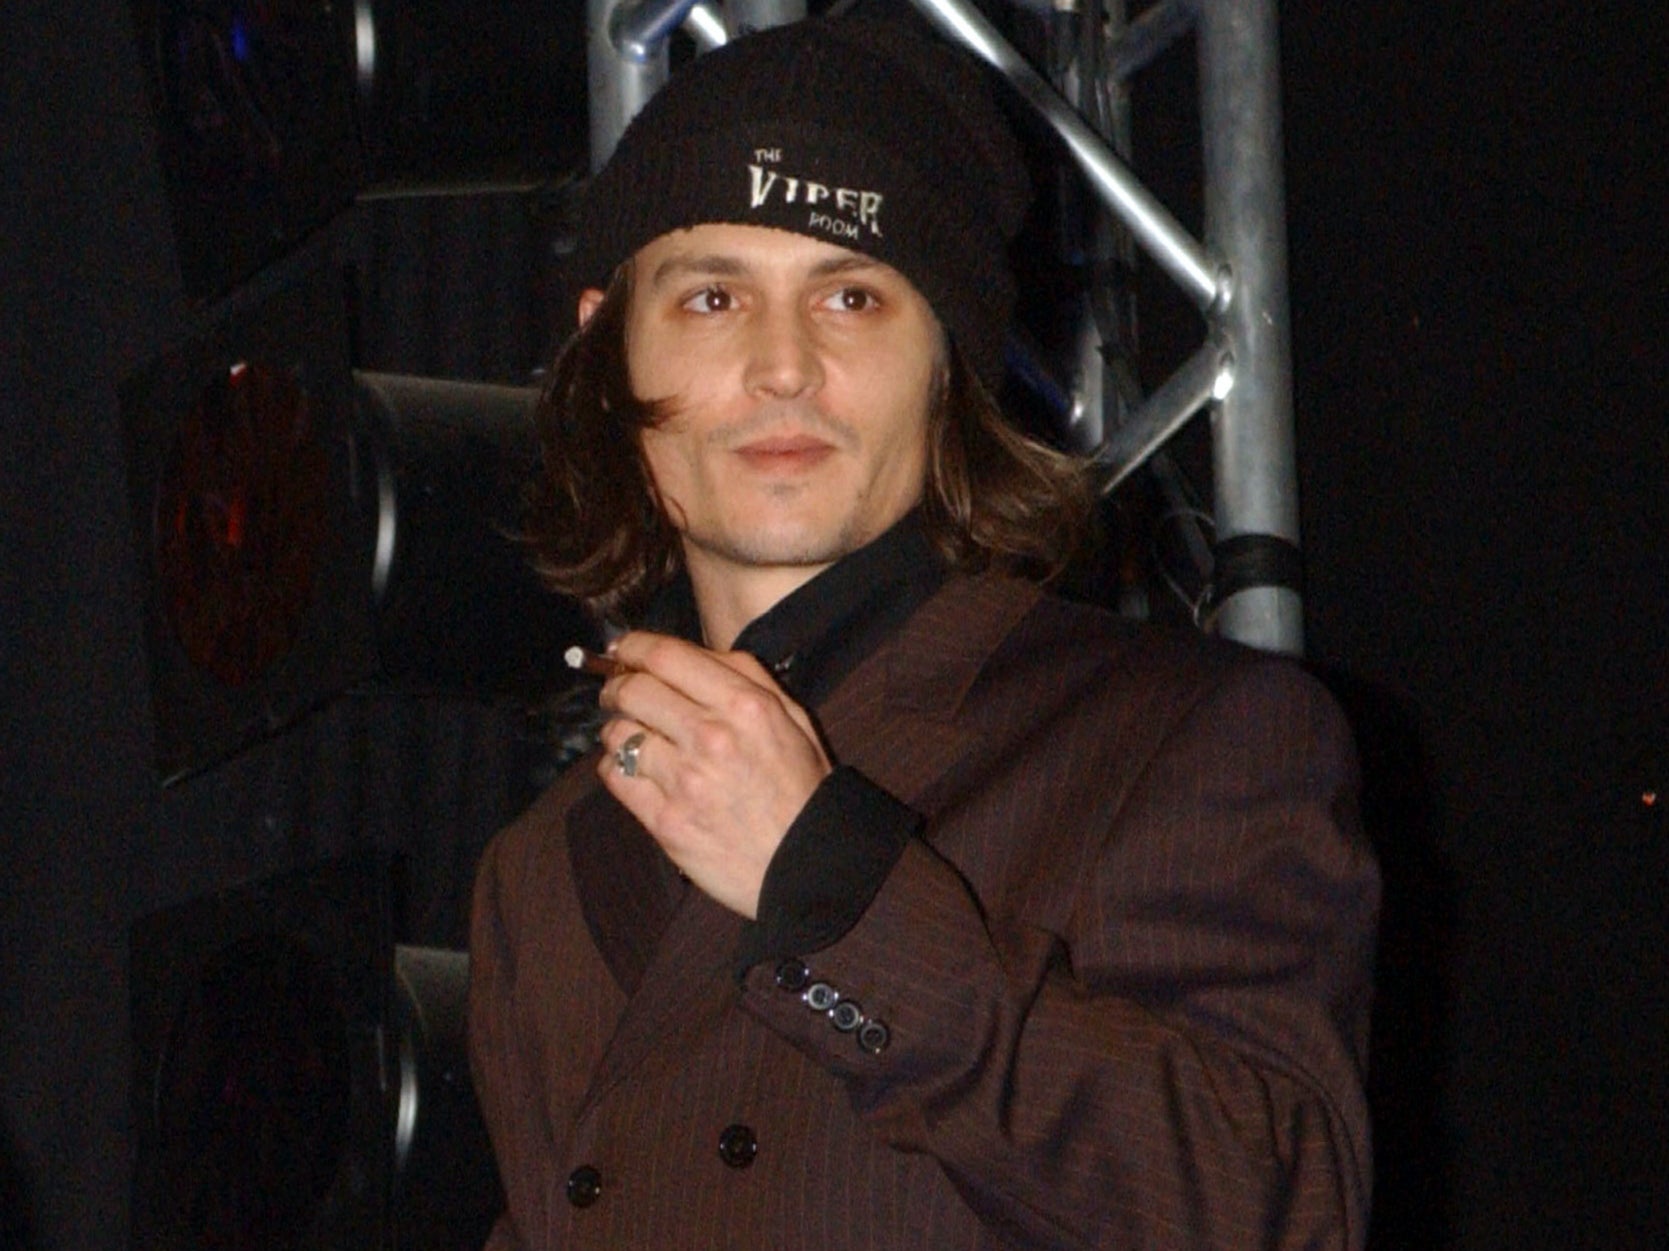 Johnny Depp wearing a Viper Room beanie in January 2002